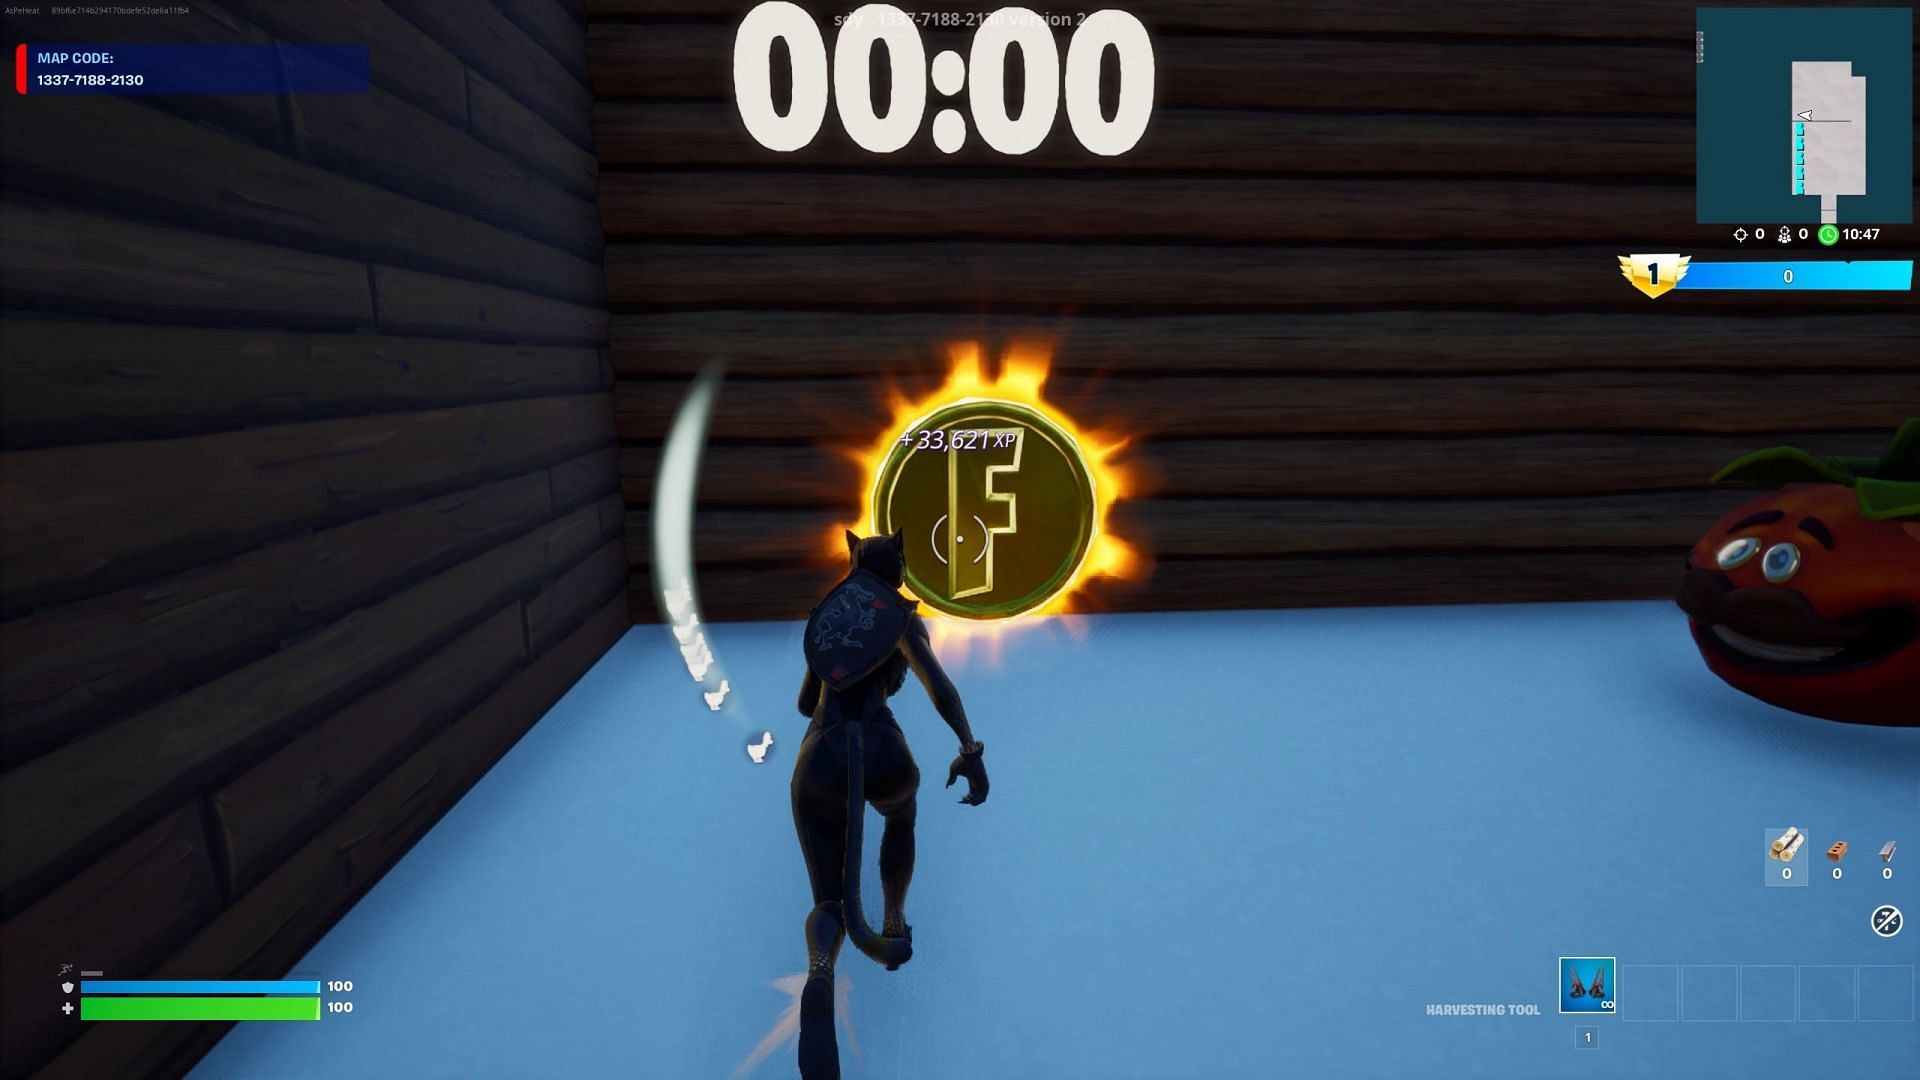 The Fortnite XP map has a gold coin which you need to pick up (Image via Epic Games)